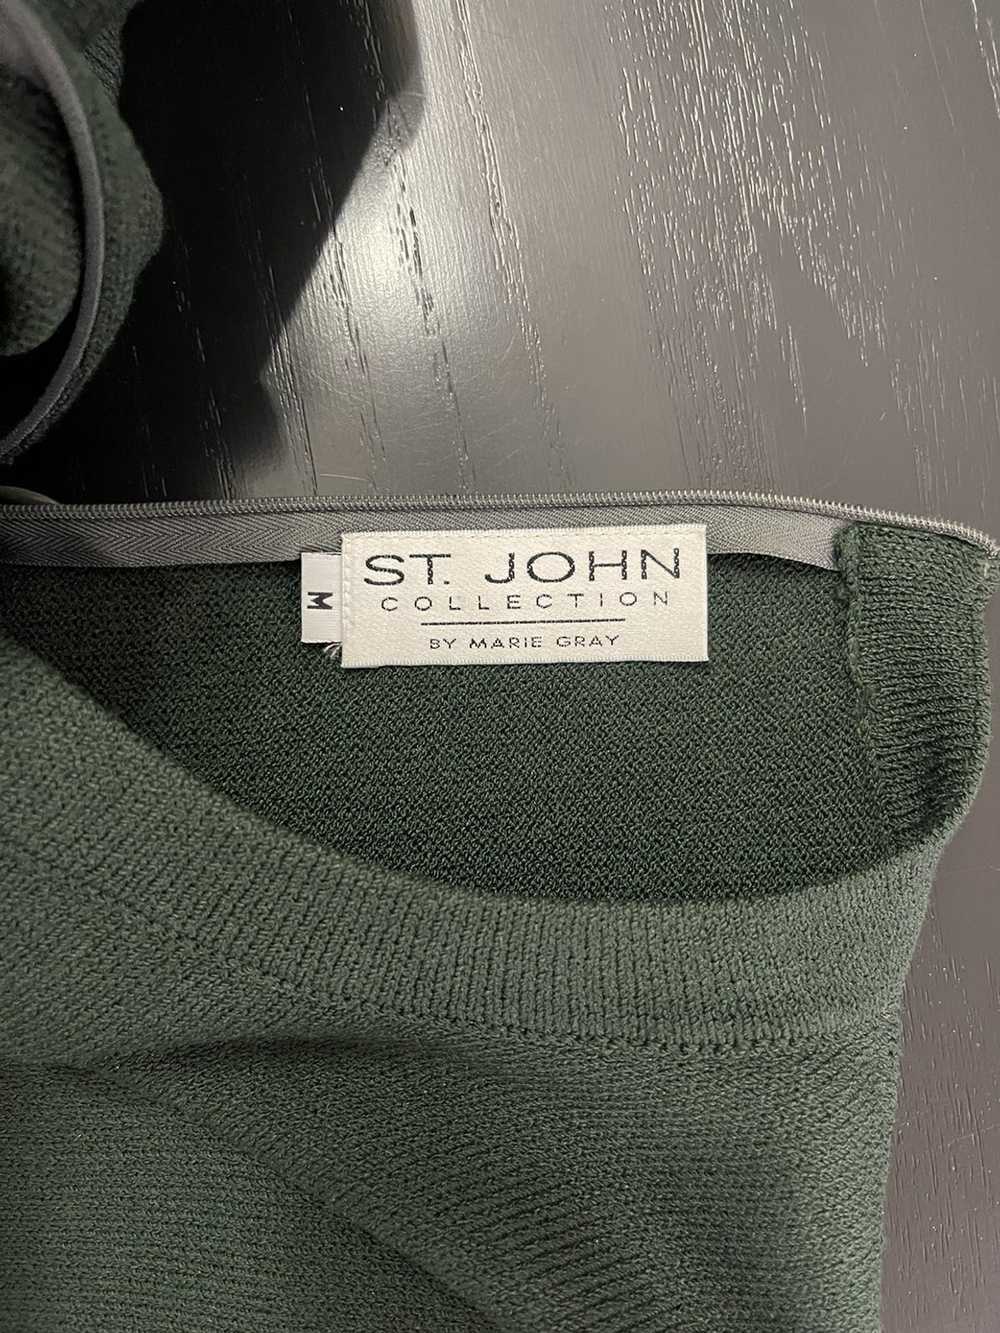 St. John Couture St. John Collection High Neck Kn… - image 4